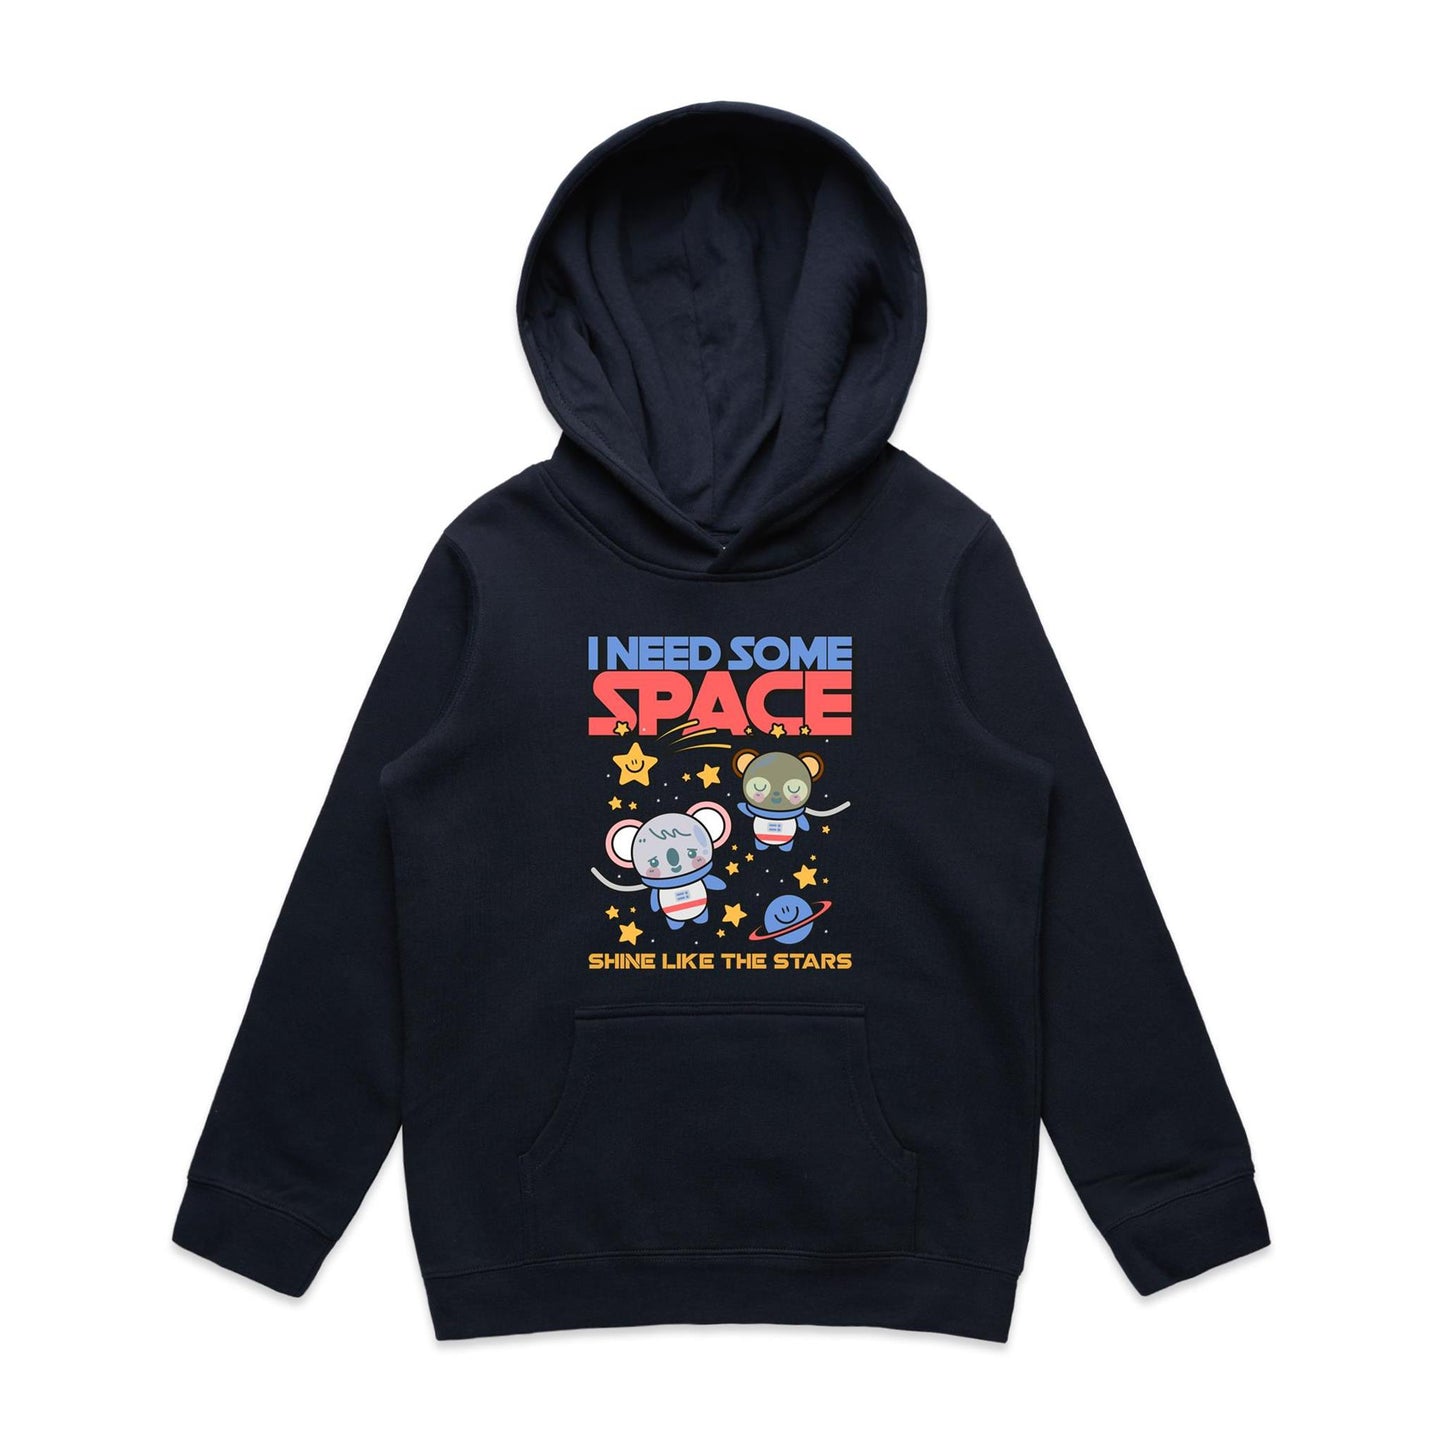 I Need Some Space - Youth Supply Hood Navy Kids Hoodie Space